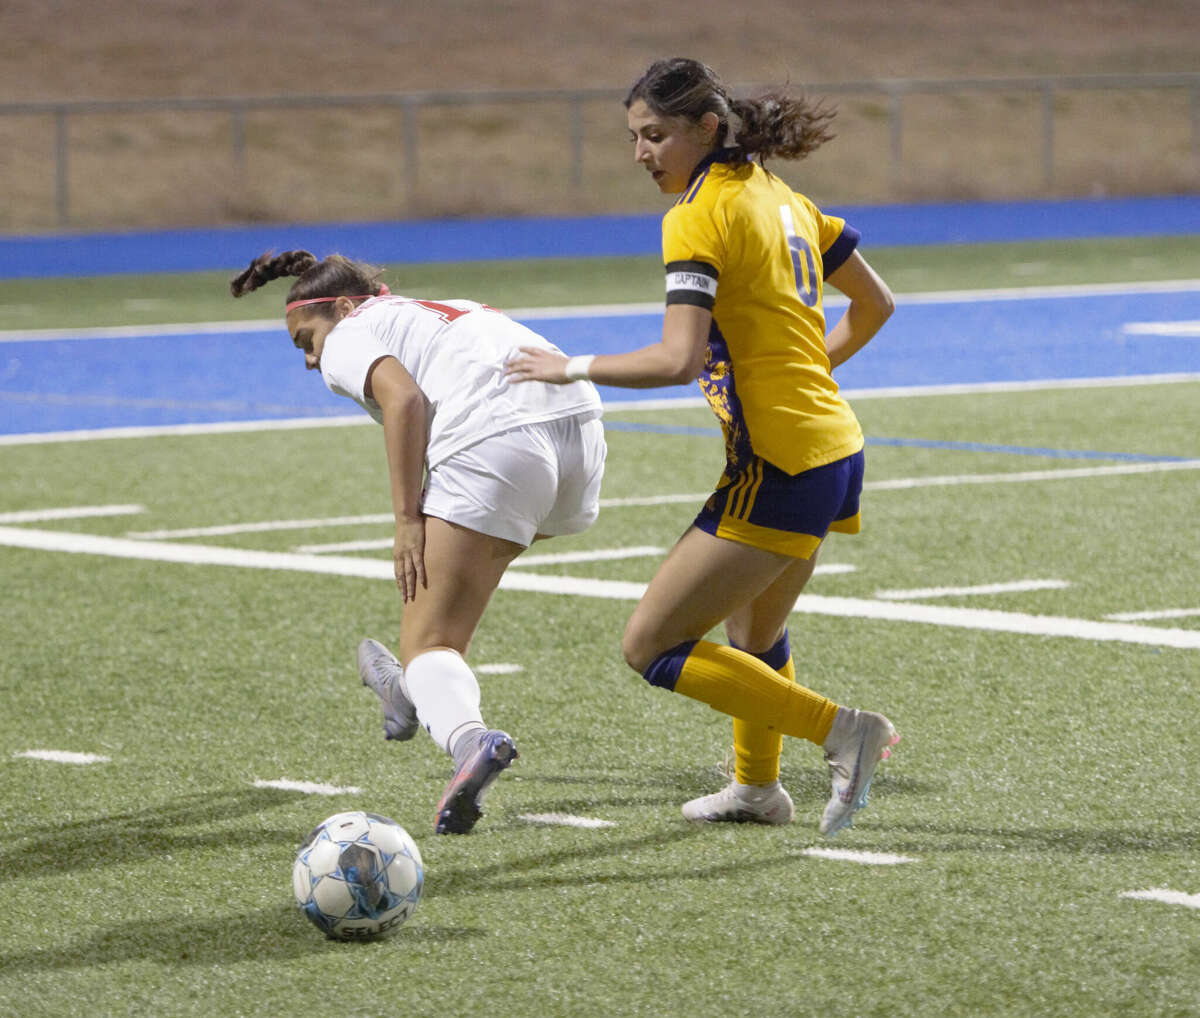 Odessa High's Paris Ray can't secure the loose ball, which allows Midland High's Melanie Sanchez to take possession during a District 2-6A girls soccer match, March 3 at Astound Broadband Stadium. 